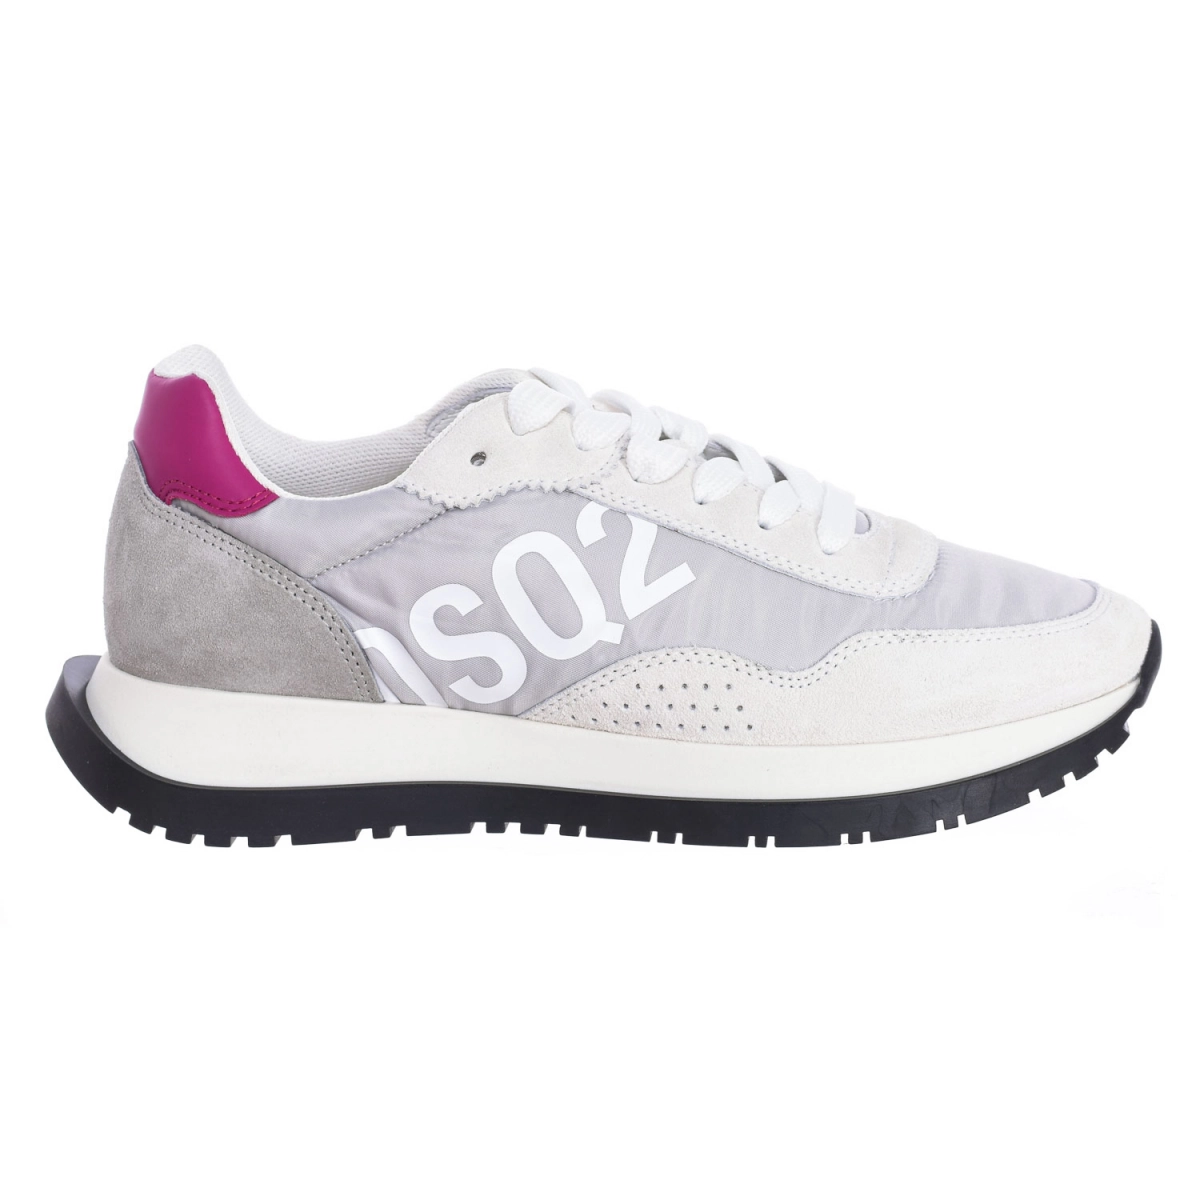 Zapatillas Deportivas DSQUARED2 Running Dsquared2 SNW0212-01601681 mujer Talla: 38 Color: Gris SNW0212-01601681-M2580.38